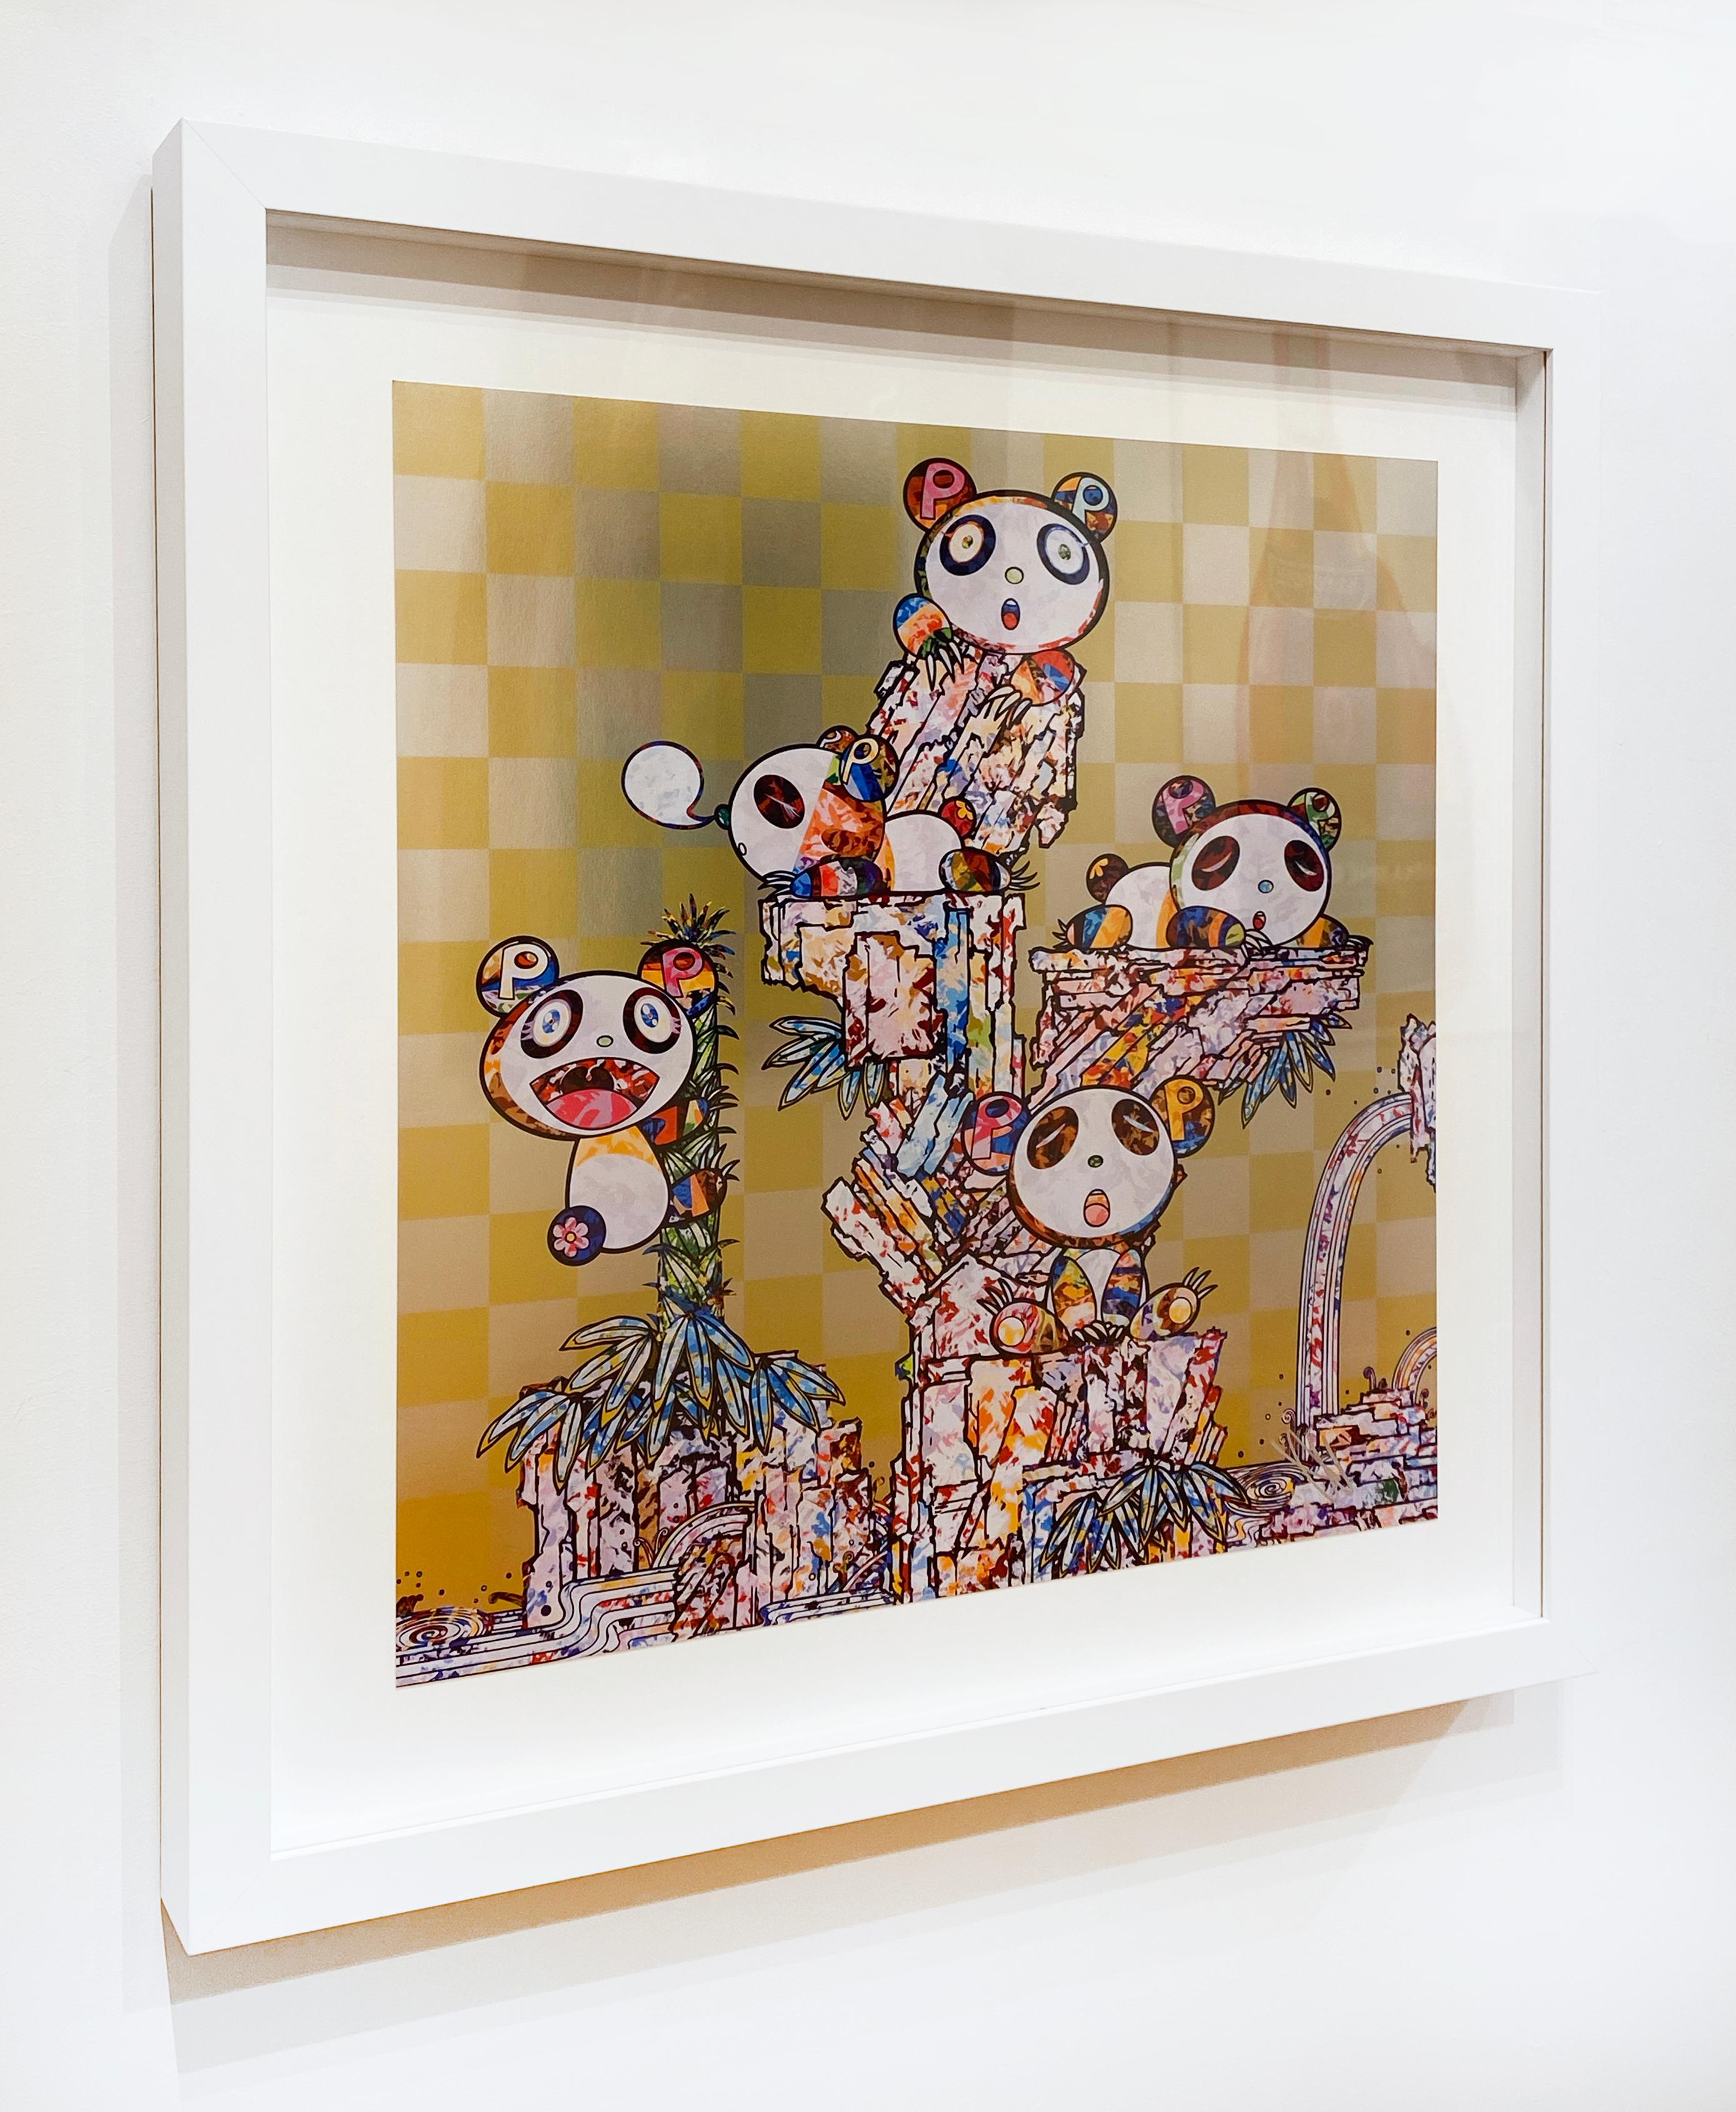 Artist:  Murakami, Takashi
Title:  Panda Cubs Panda Cubs
Date:  2020
Medium:  Offset Lithograph in colors on smooth wove paper
Unframed Dimensions:  19